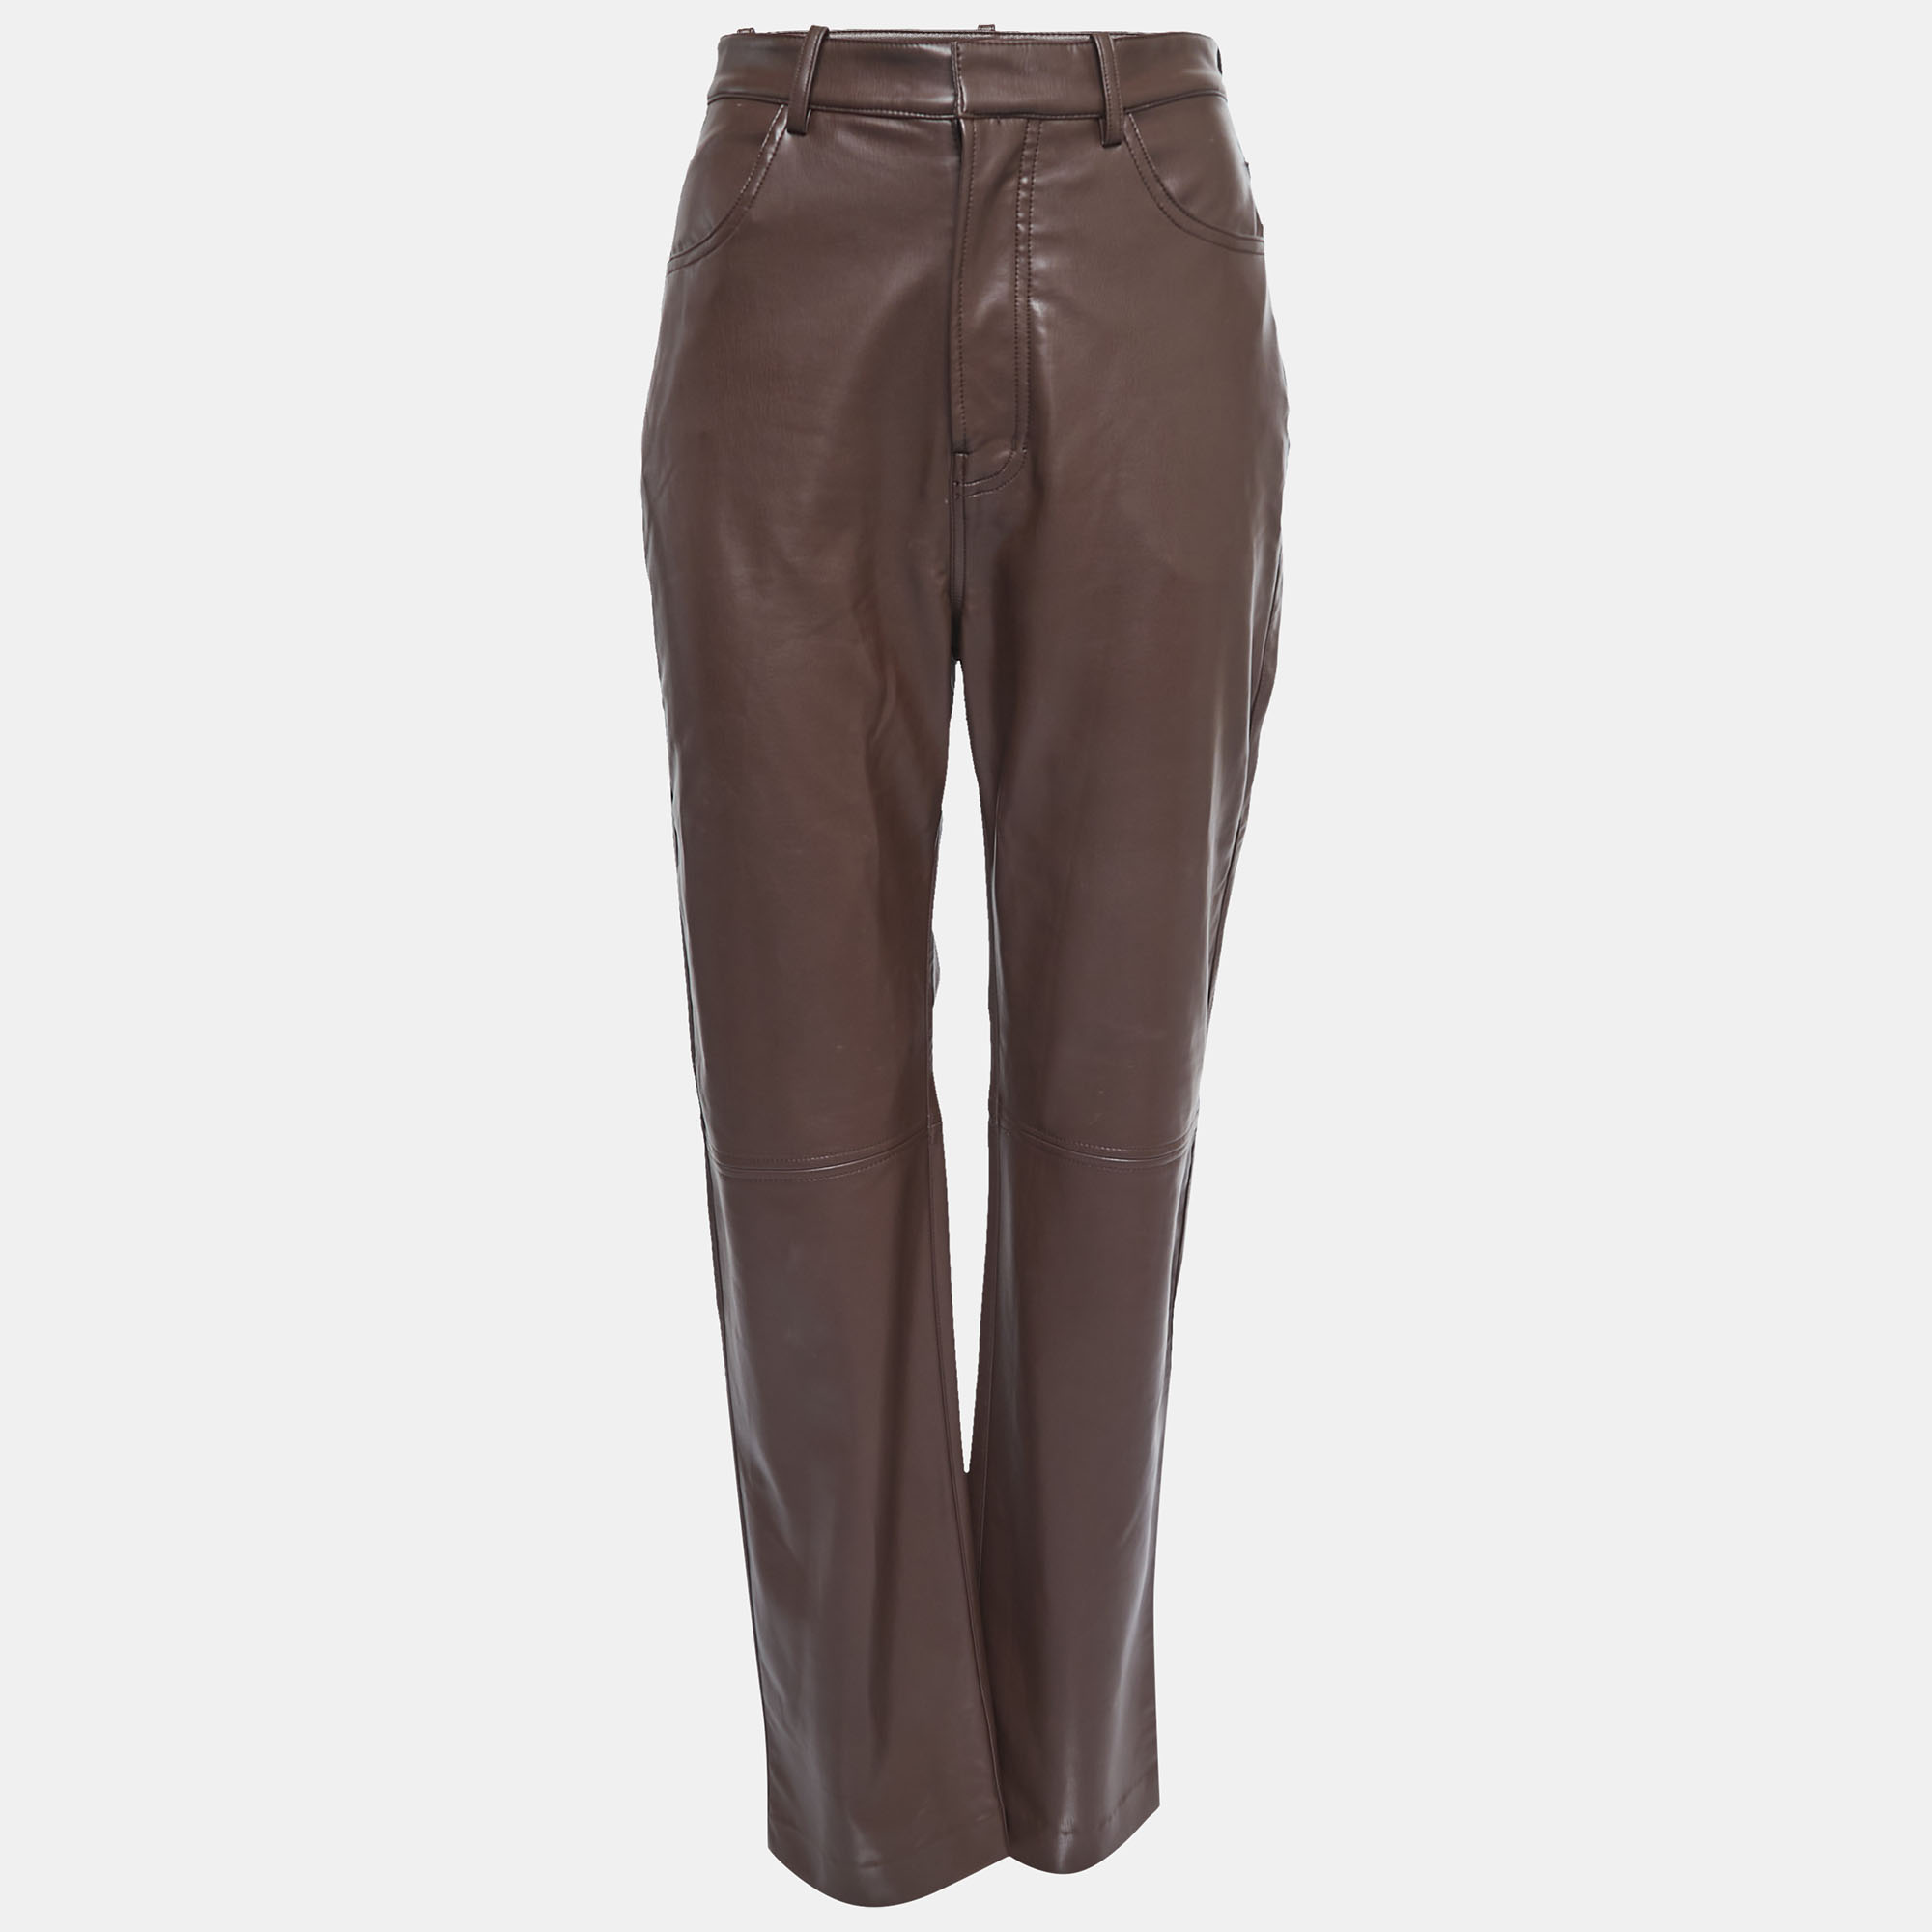 House Of CB Brown Faux Leather Straight Leg Pants S